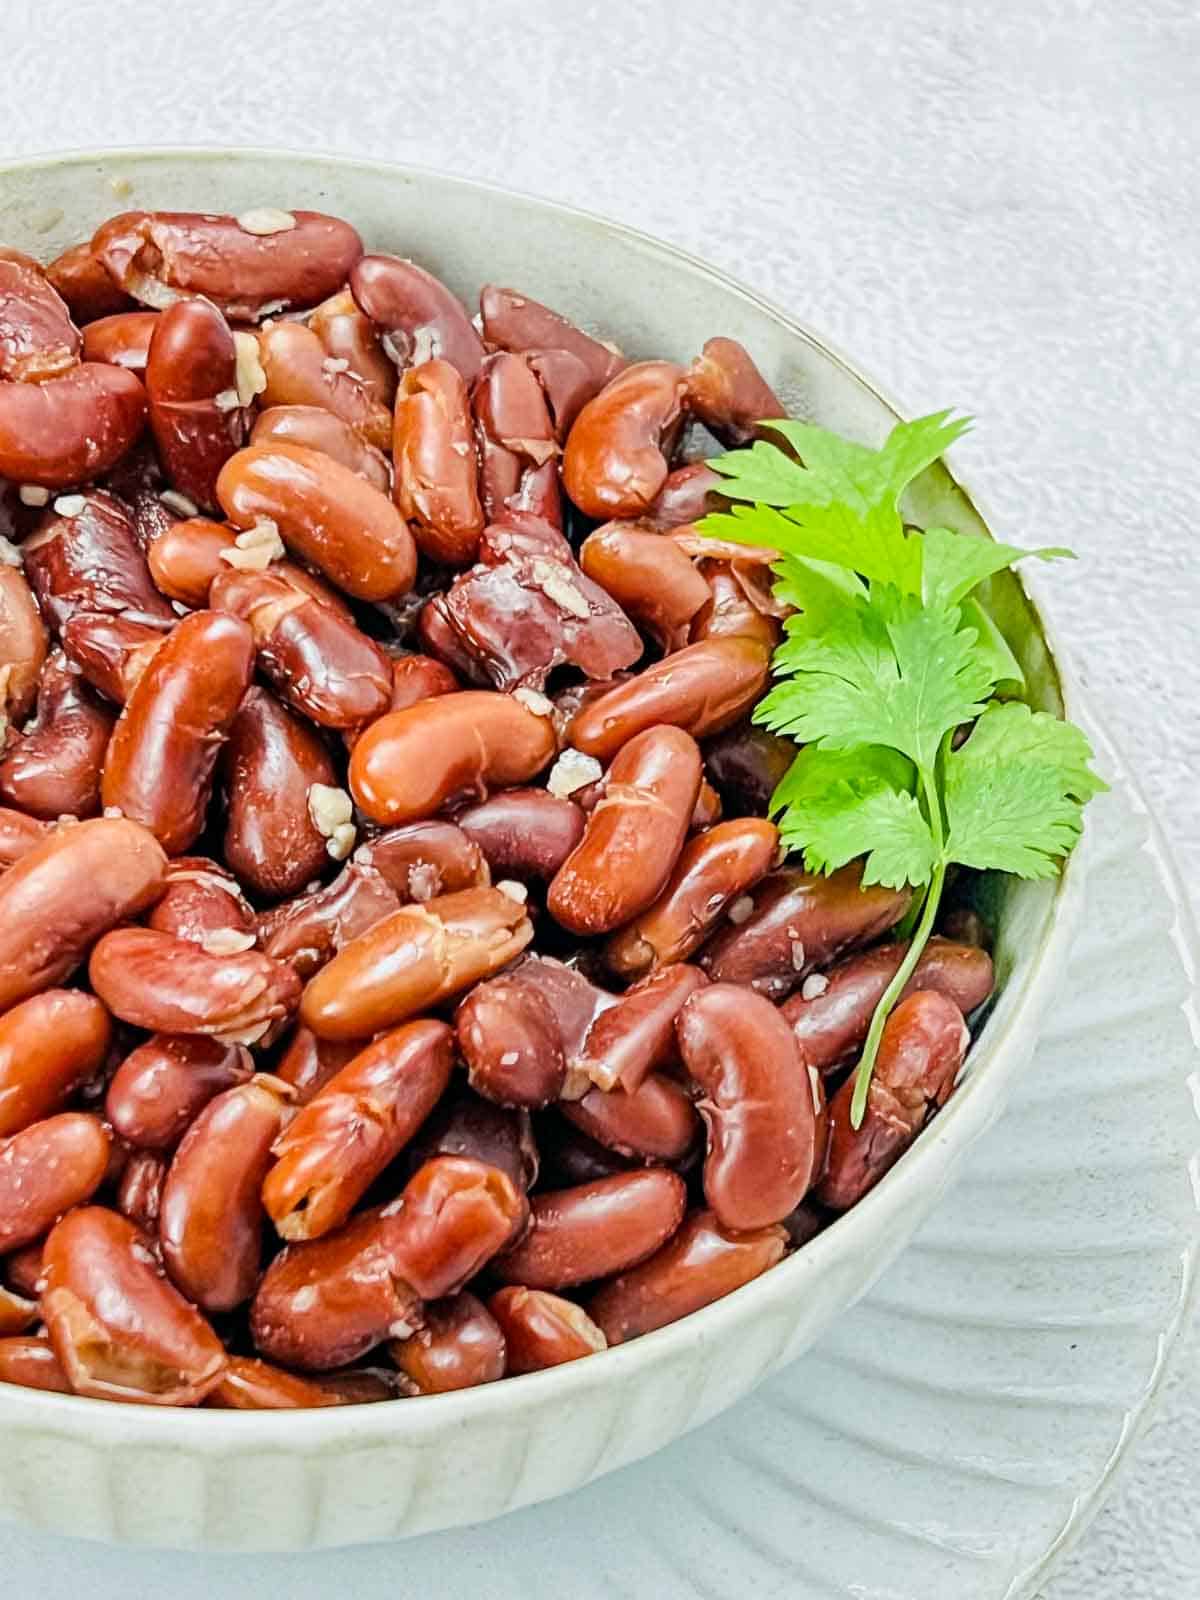 Cooked kidney beans in a white bowl.